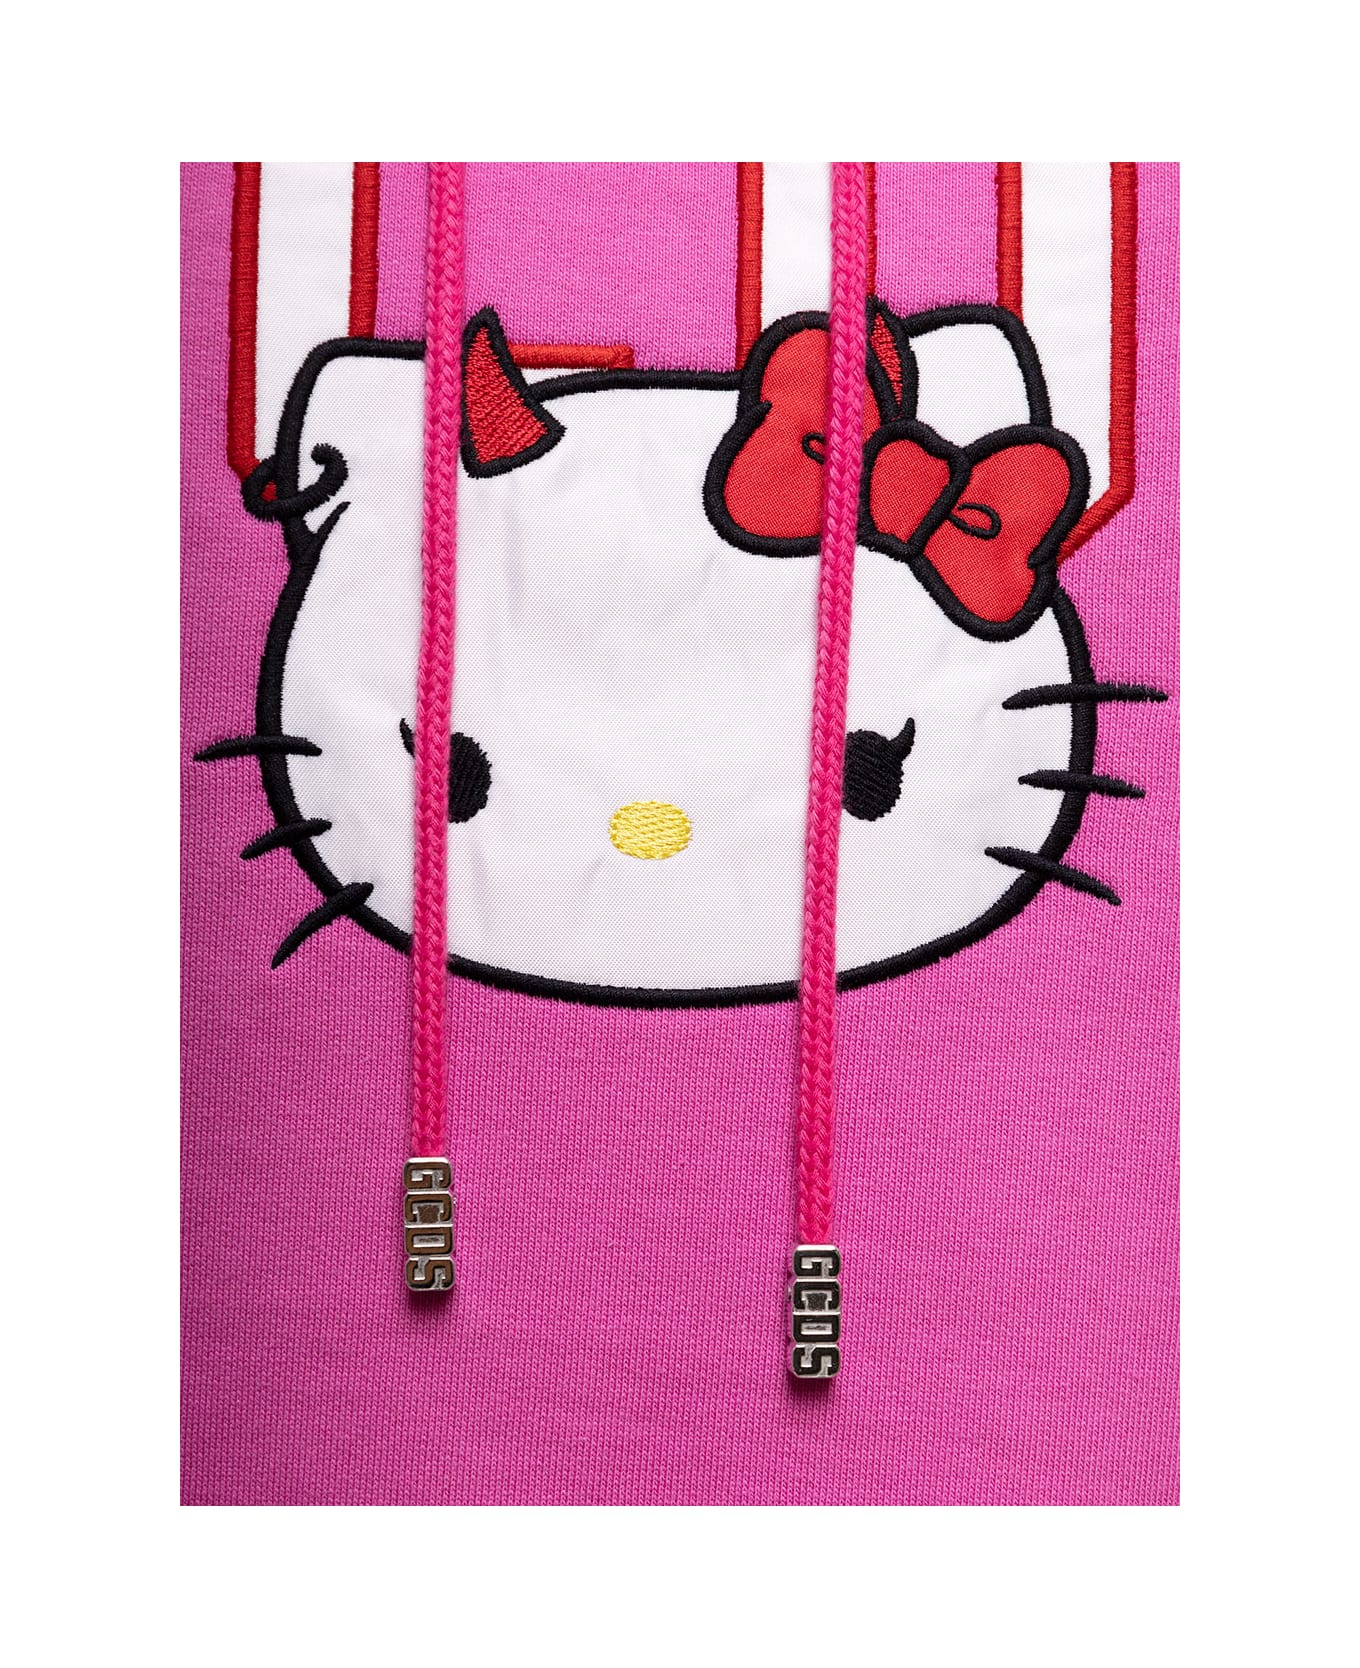 GCDS Pink Jersey Hoodiie In Fleece Cotton With Hello Kitty Print And Contrast Bands Gcds Woman - Pink